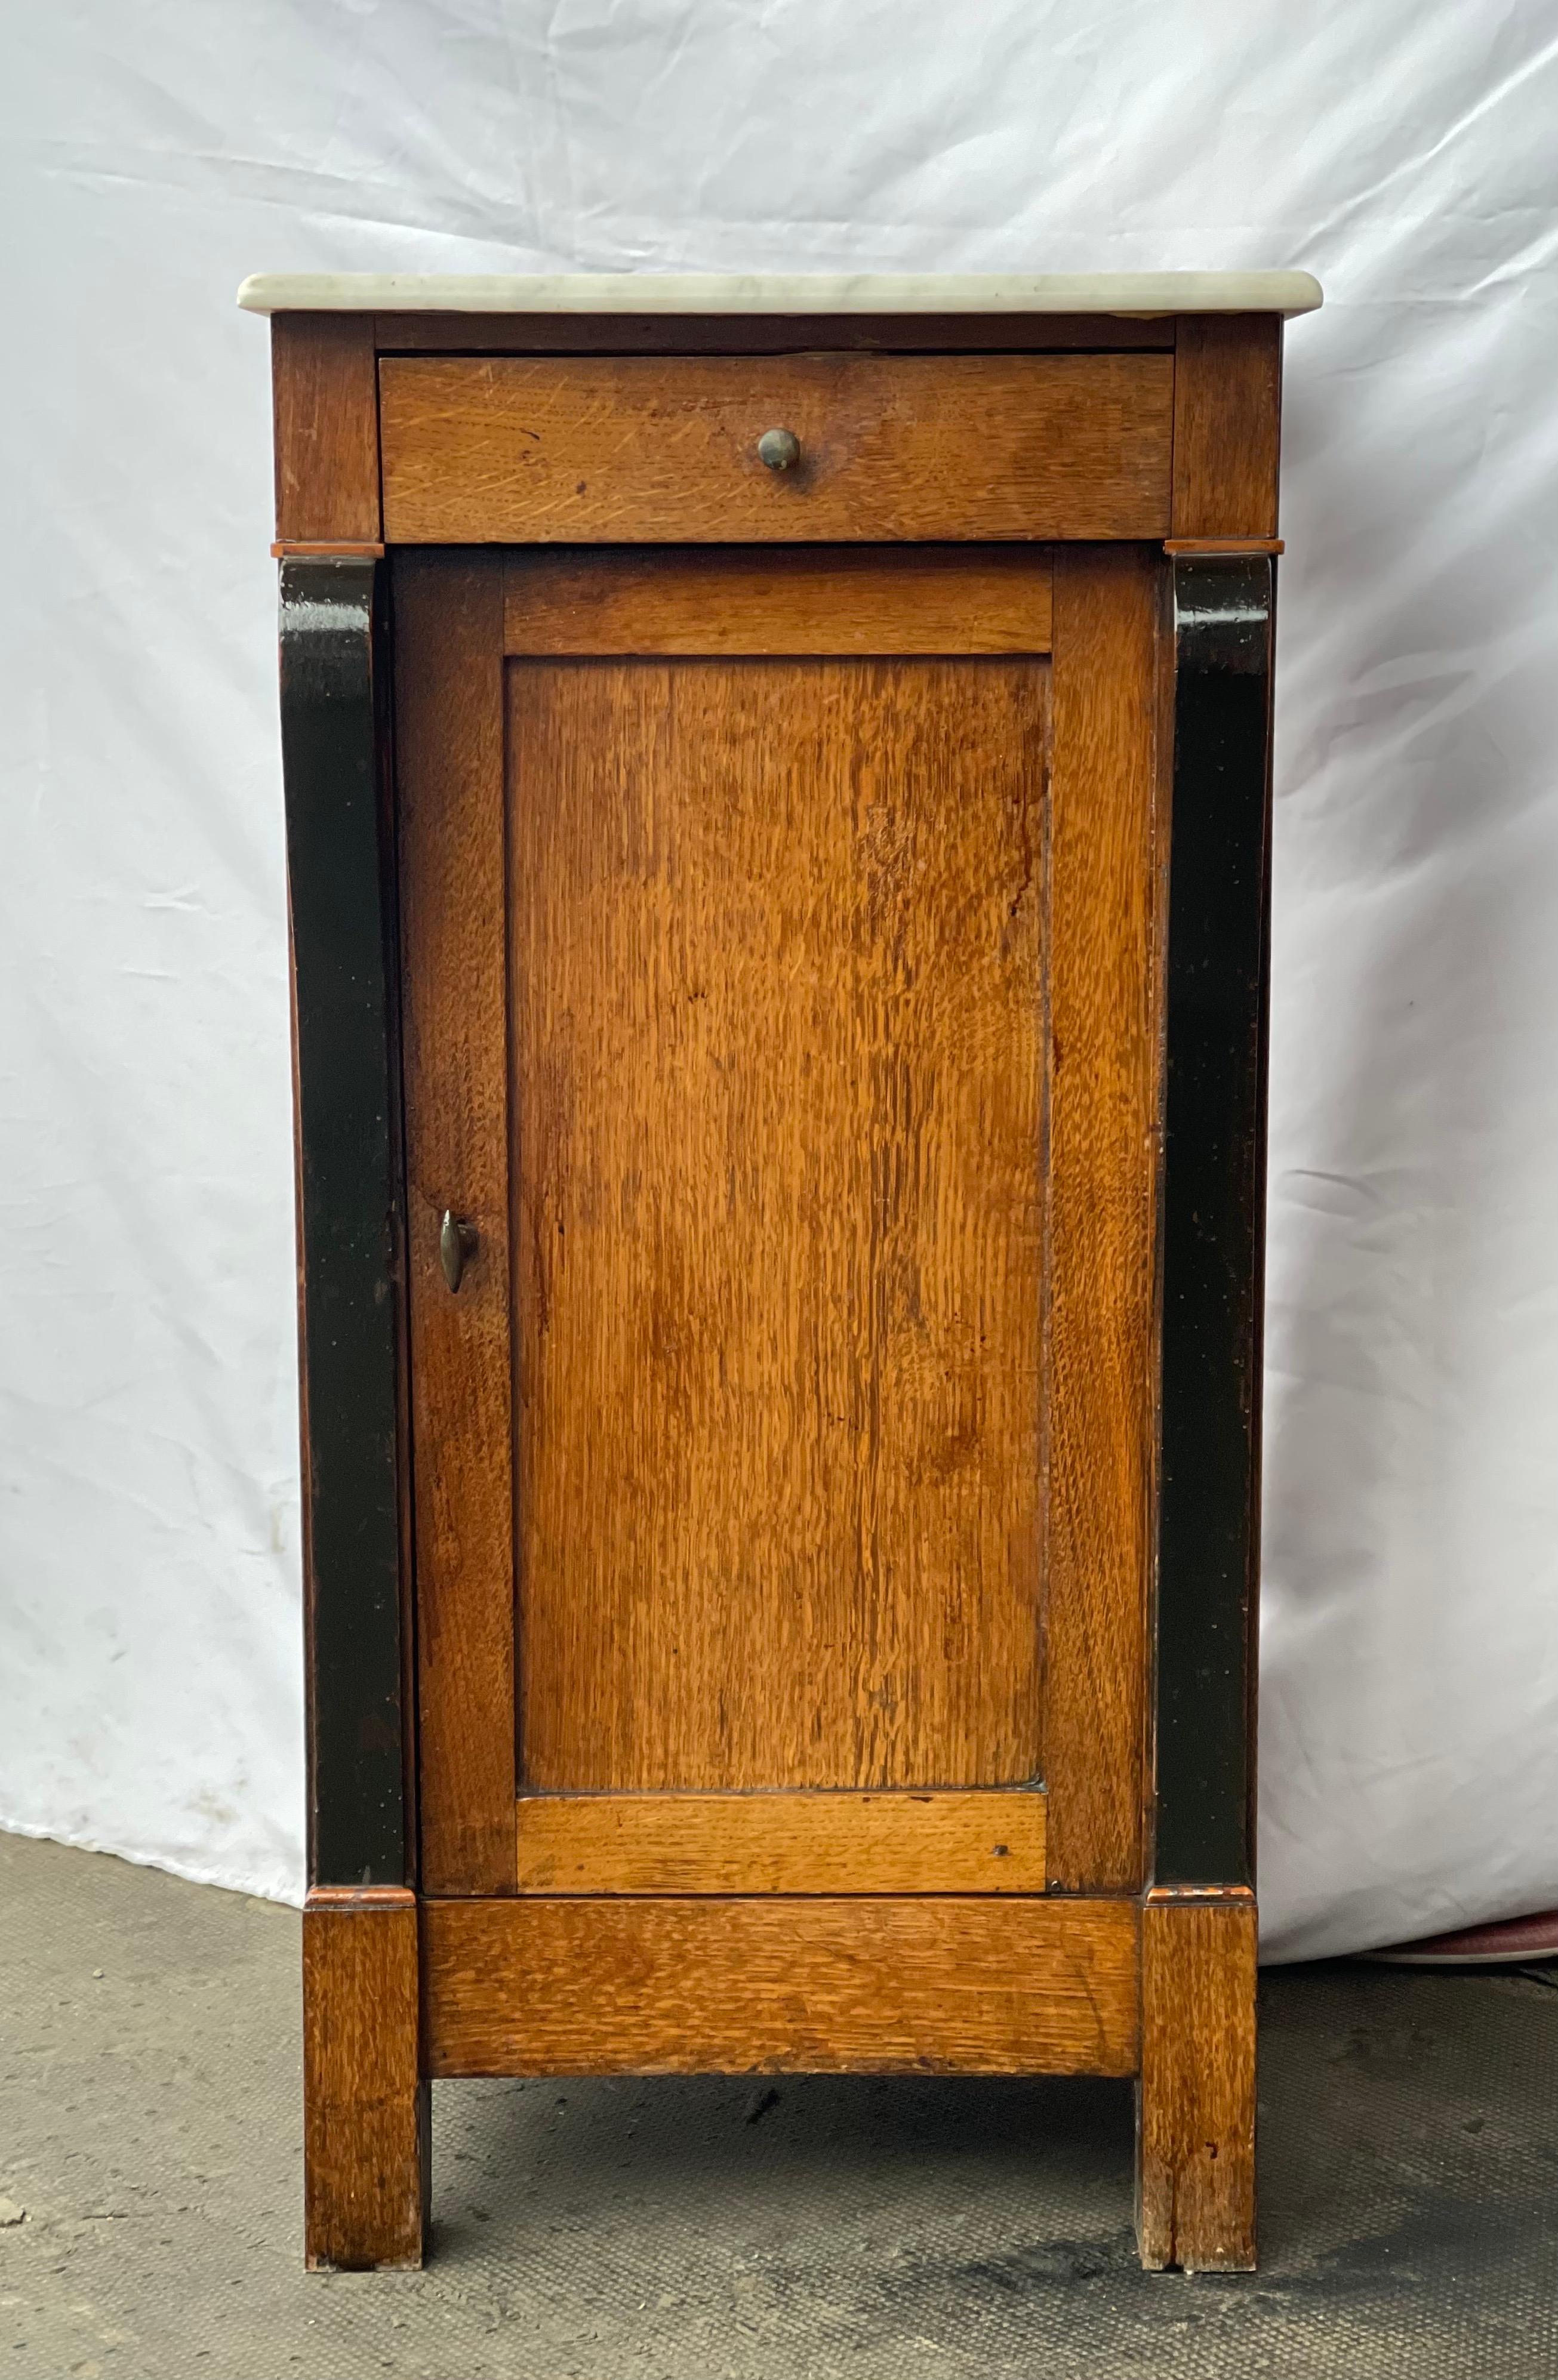 A stately restoration period cabinet or nightstand in walnut. With a slim profile and geometric simplicity of form, this little piece will fit in beautifully with a variety of styles. A plinth base with flat sides and unembellished marble top let